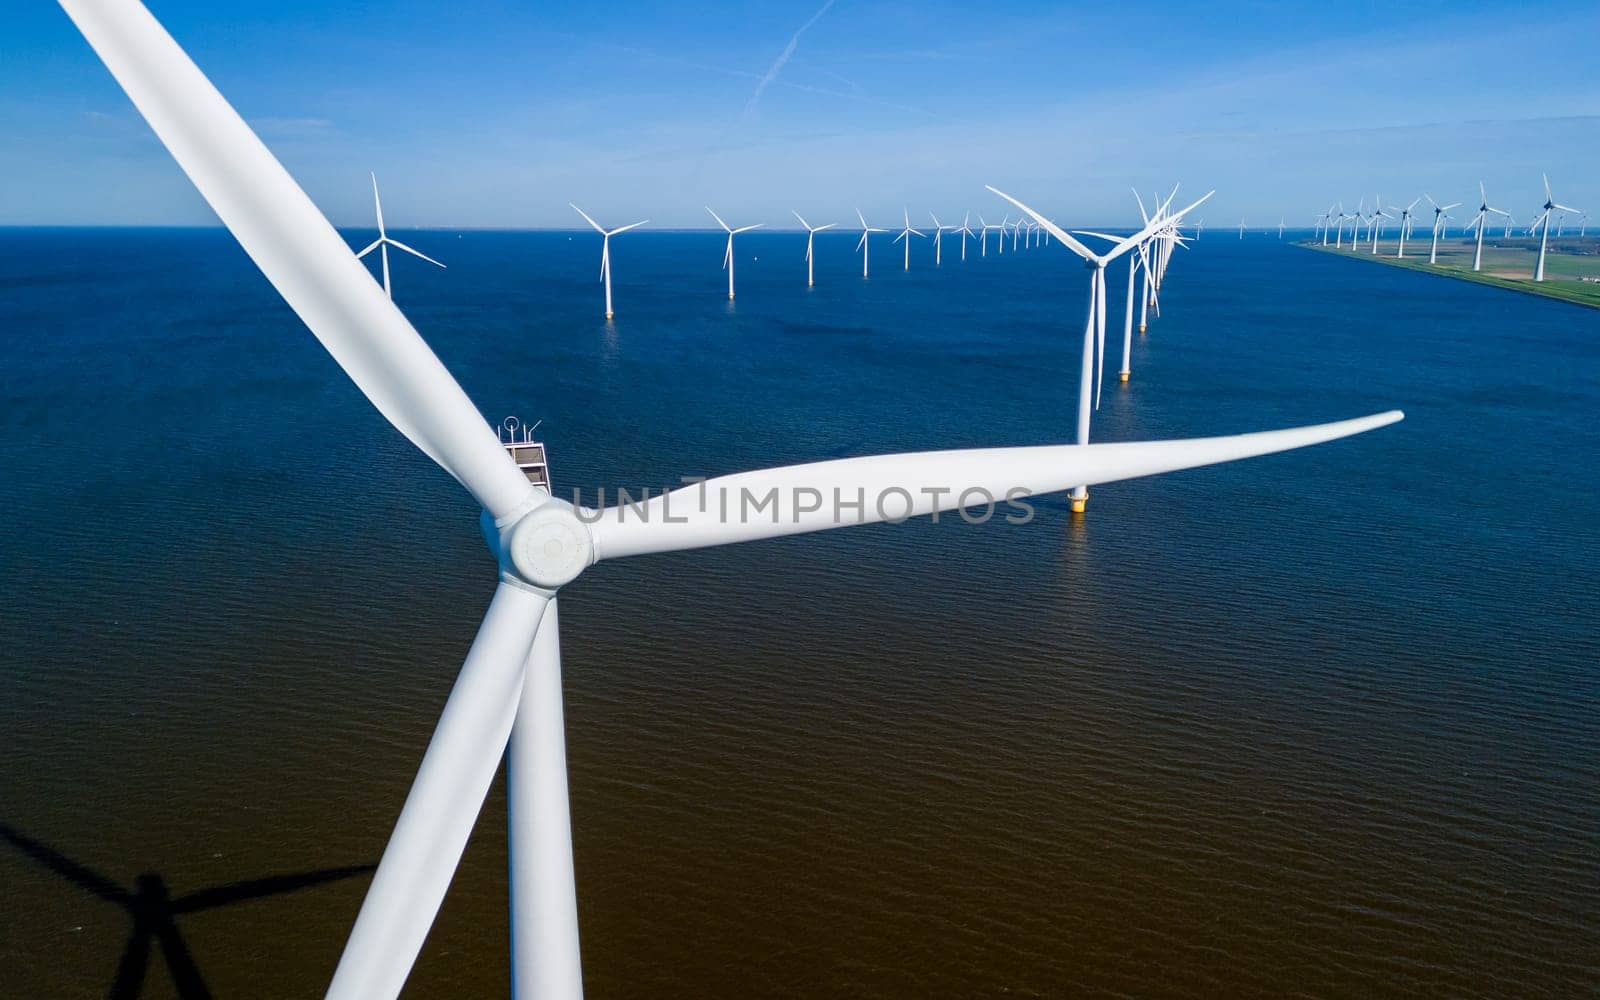 A vast body of water stretches out before the viewer, with numerous windmills standing tall in the background, set against a cloudy sky. windmill turbines in ocean